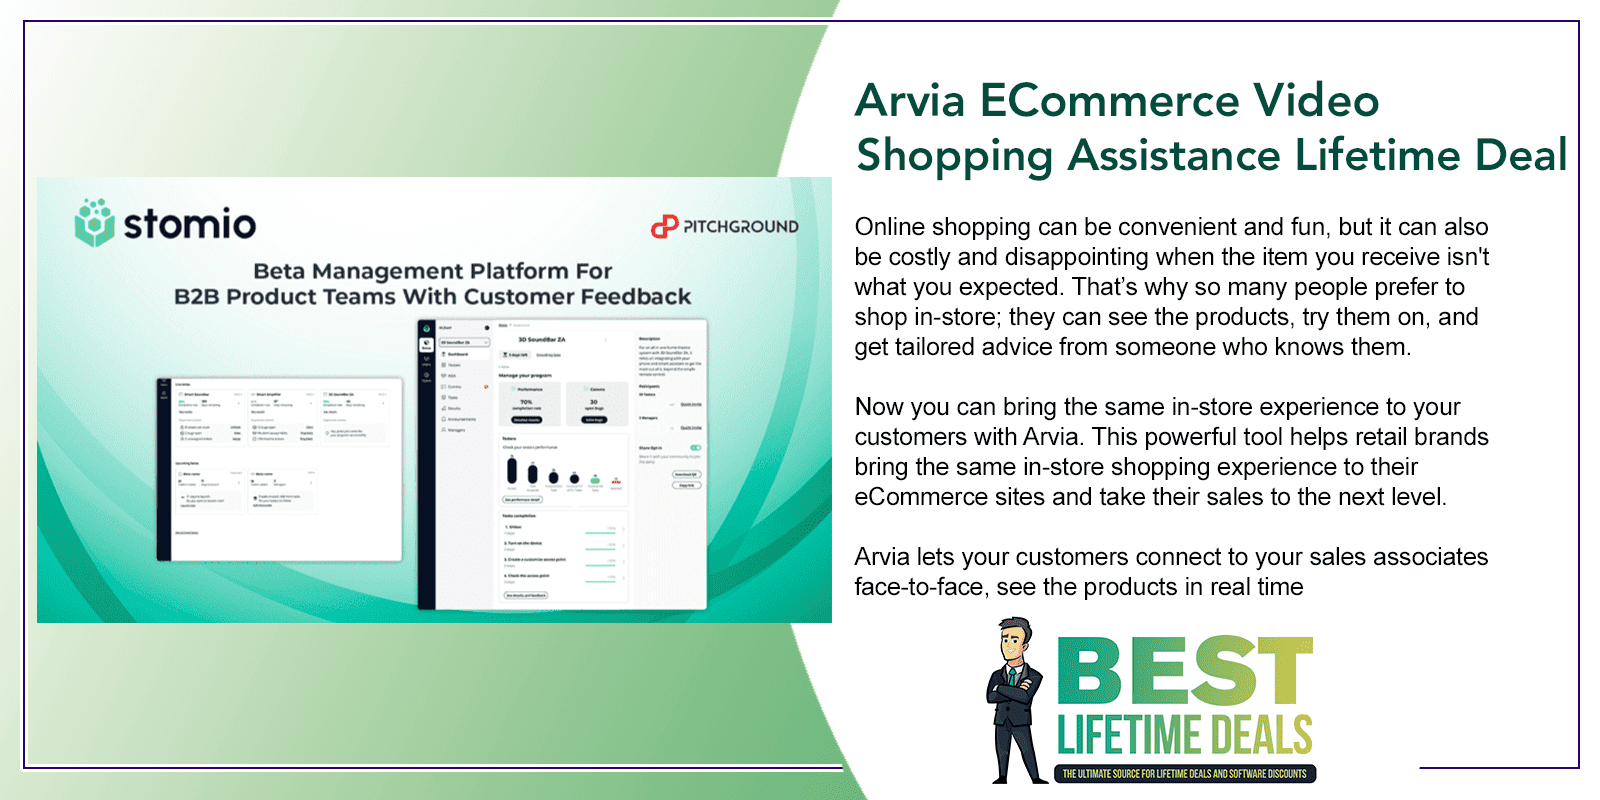 Arvia ECommerce Video Shopping Assistance Lifetime Deal